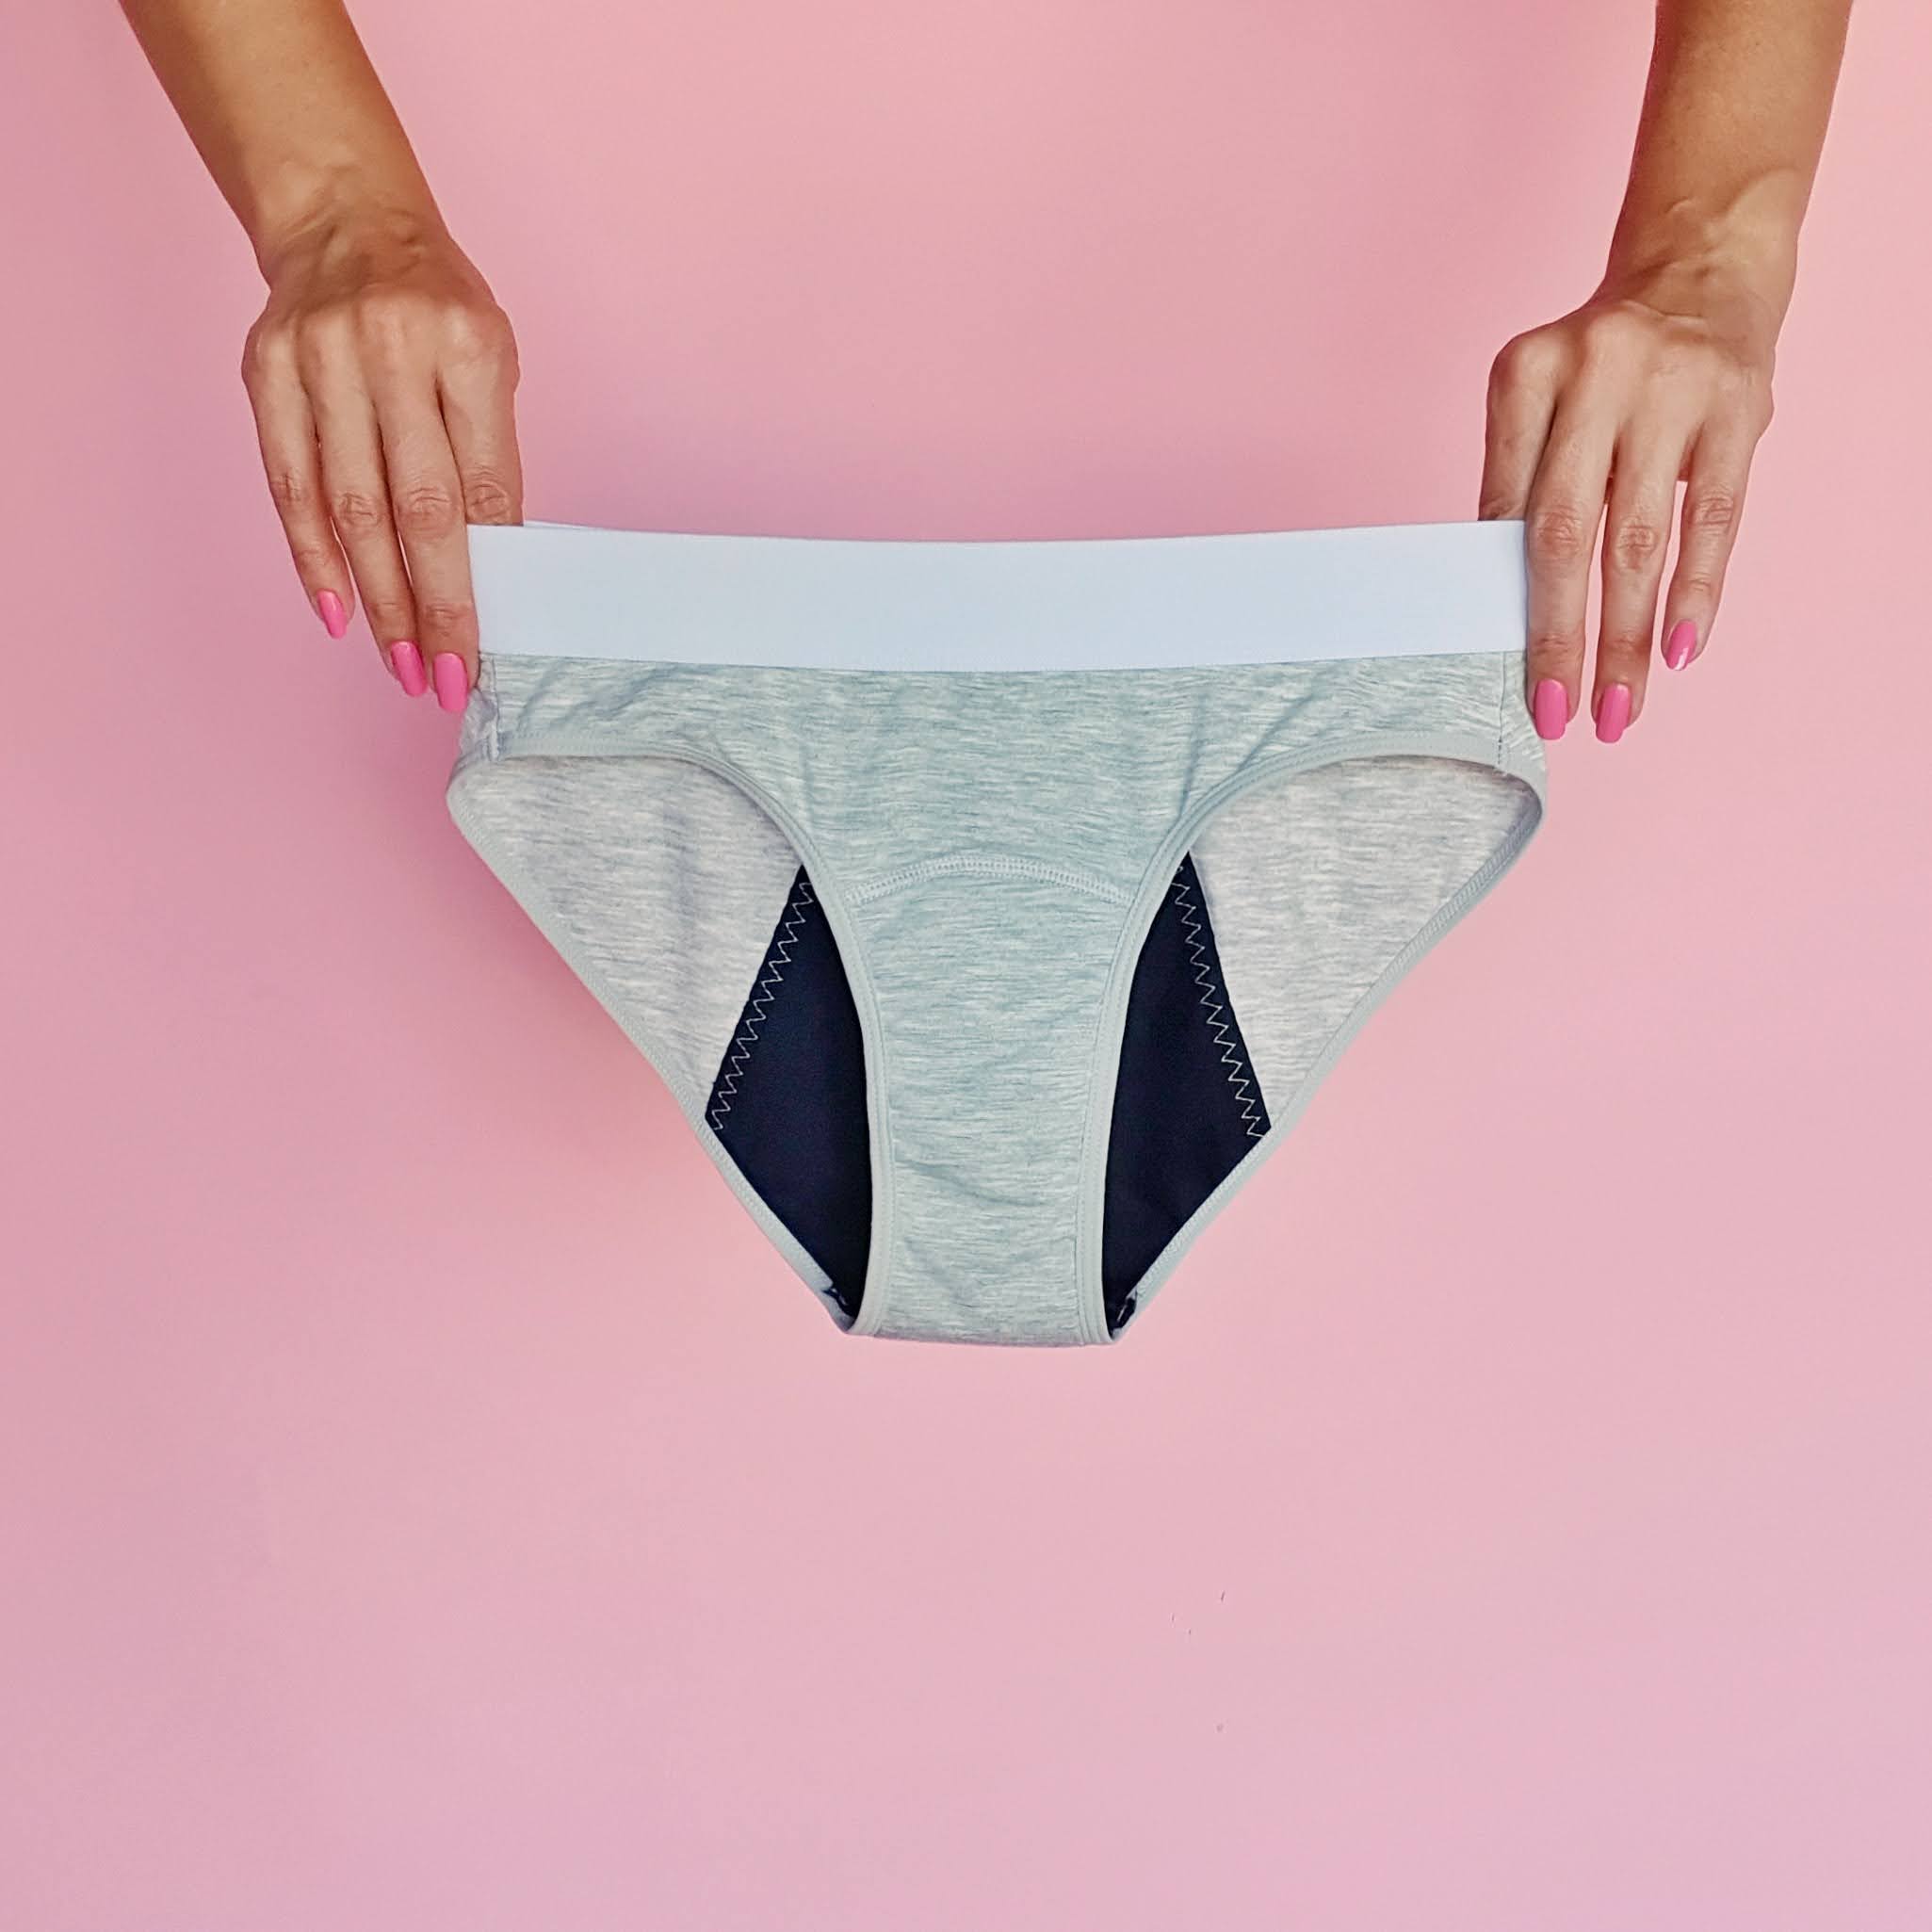 Leaking Proof Menstrual Underpants For Teenage Girls With Pockets